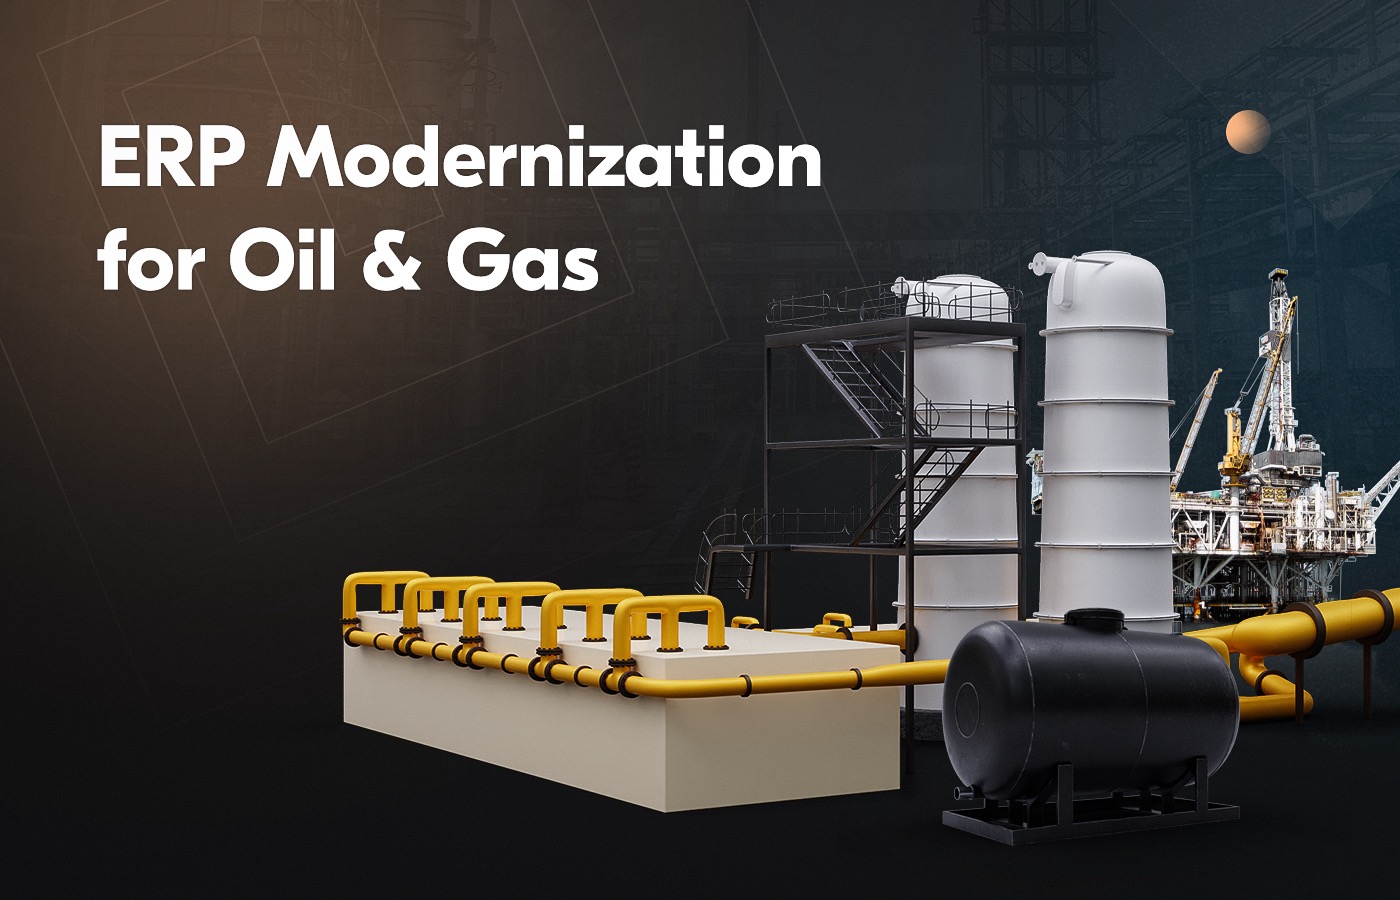 Modernizing oil and gas ERP software